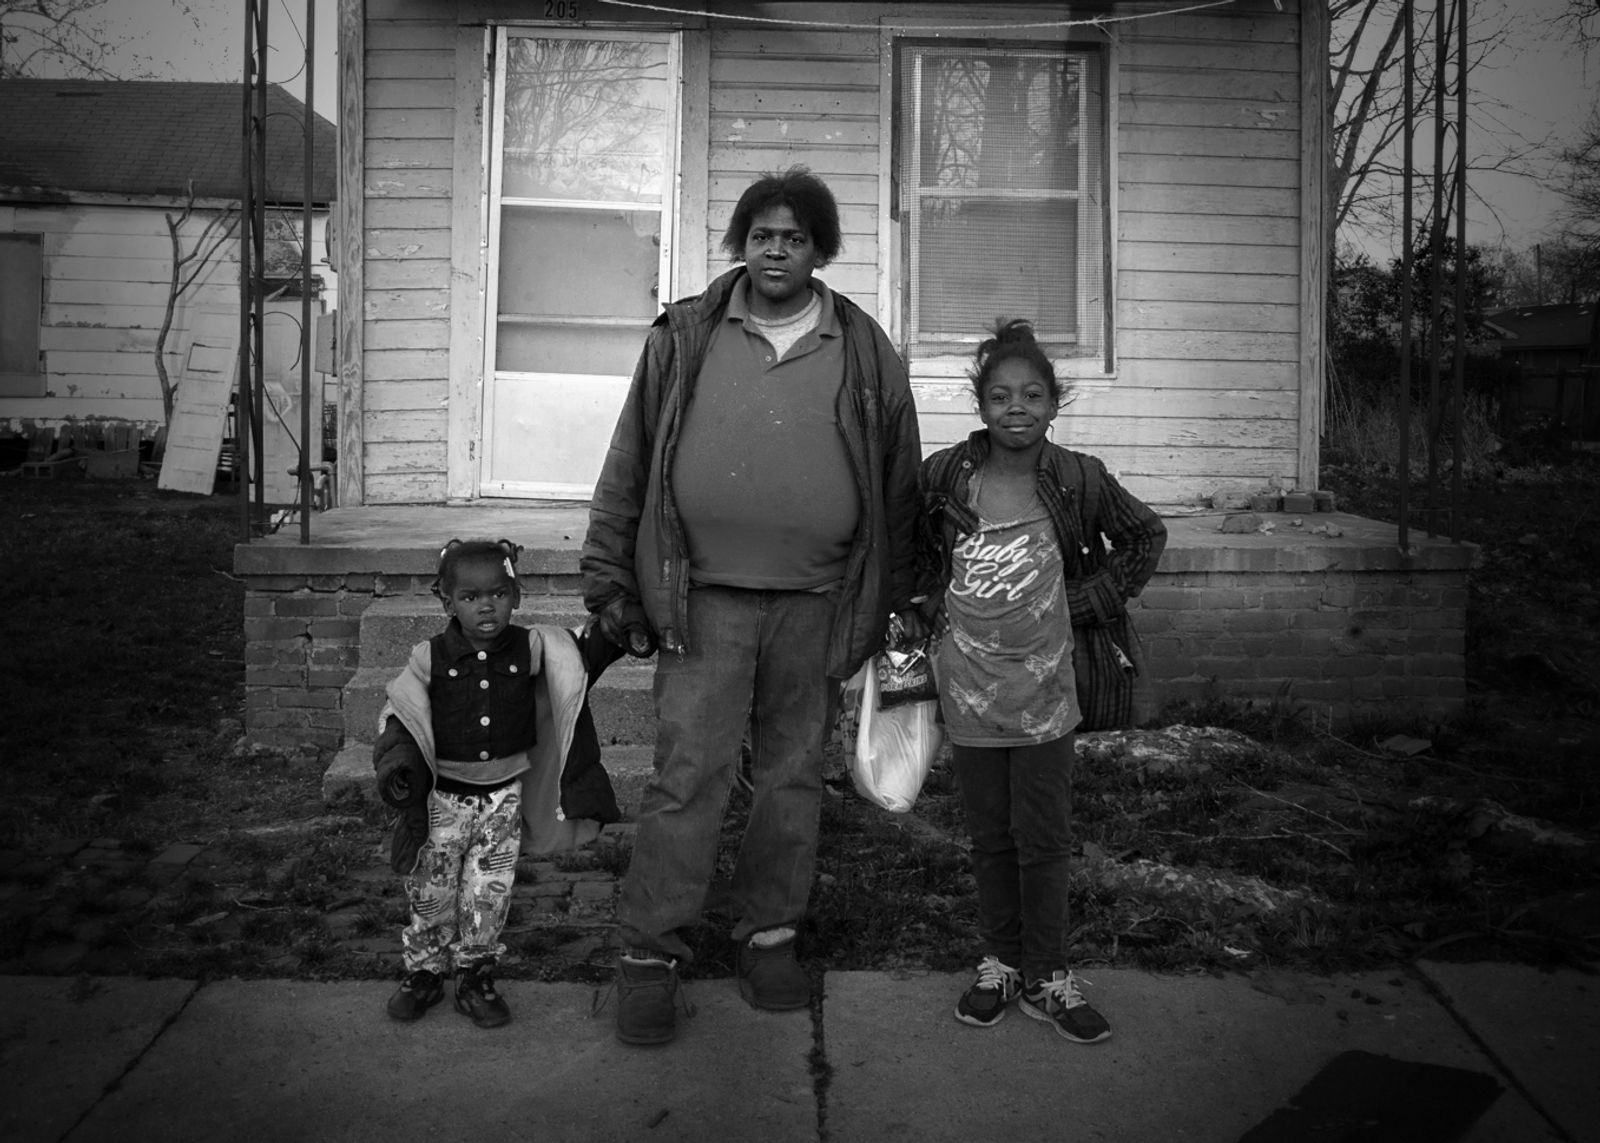 © Rebecca Moseman - Family. A mother and her two daughters pause outside of an abandoned home on the streets of Greenwood, Mississippi.